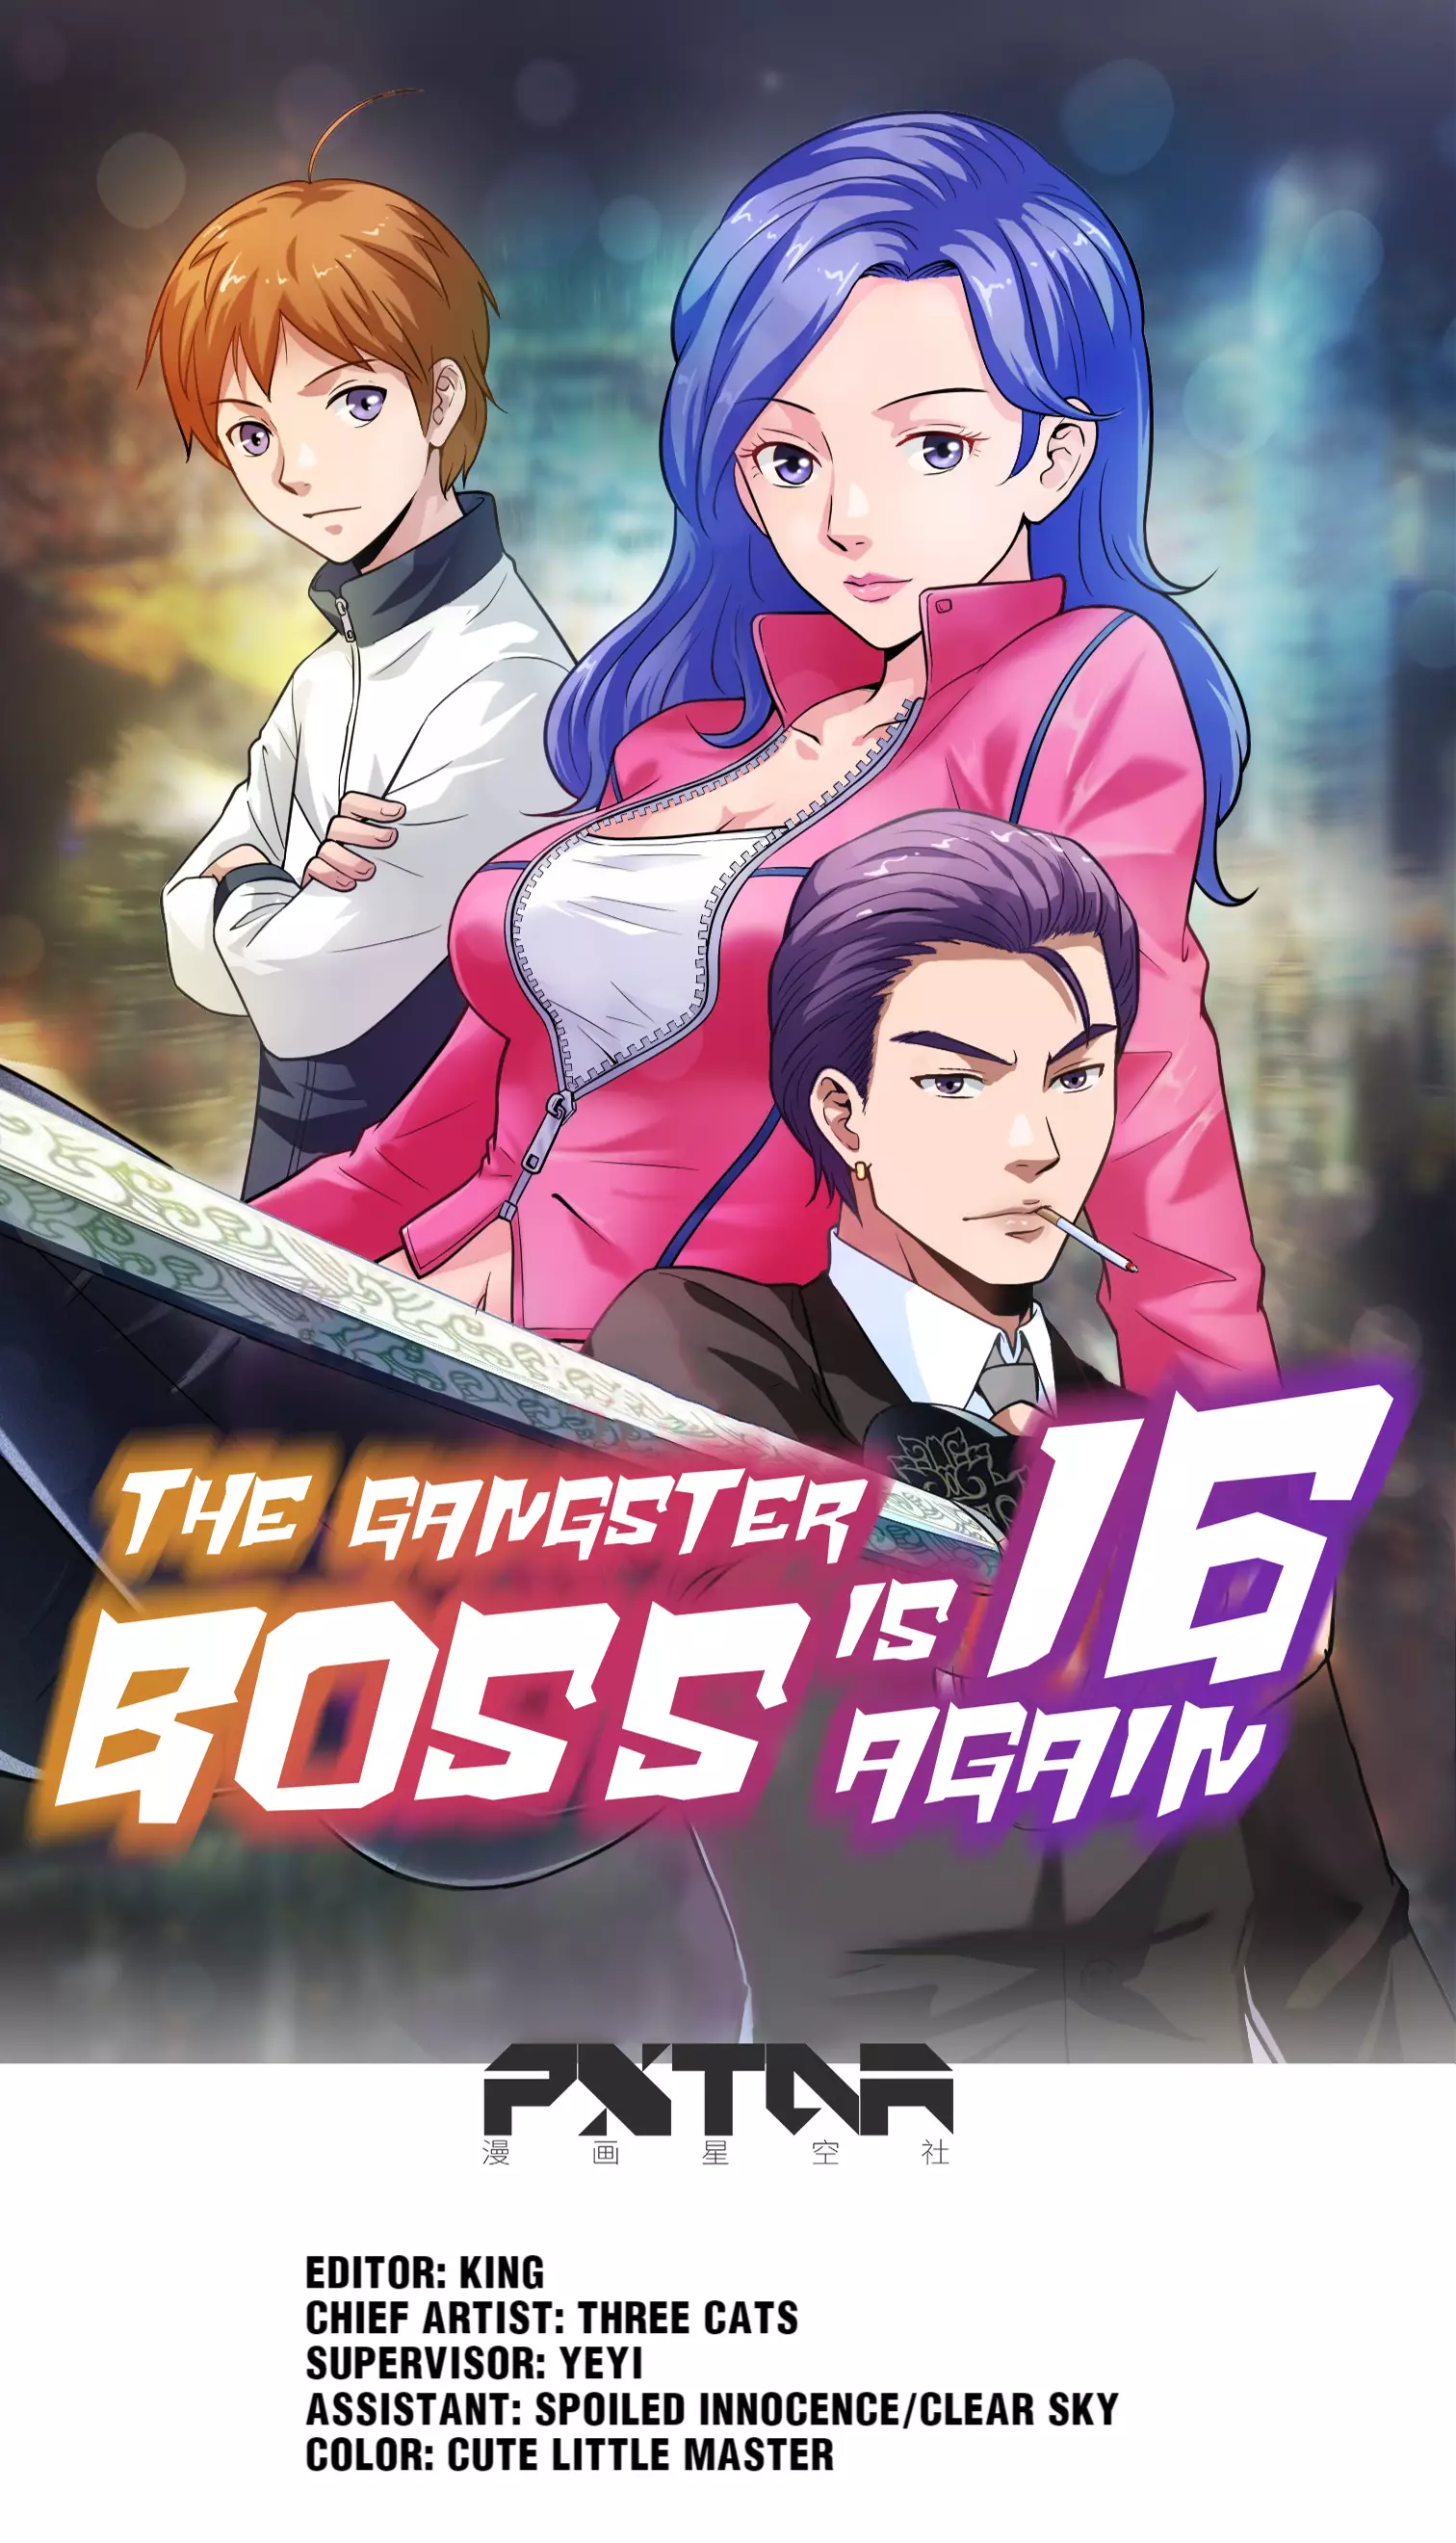 The Gangster Boss Is 16 Again - 28 page 1-07e9d73d